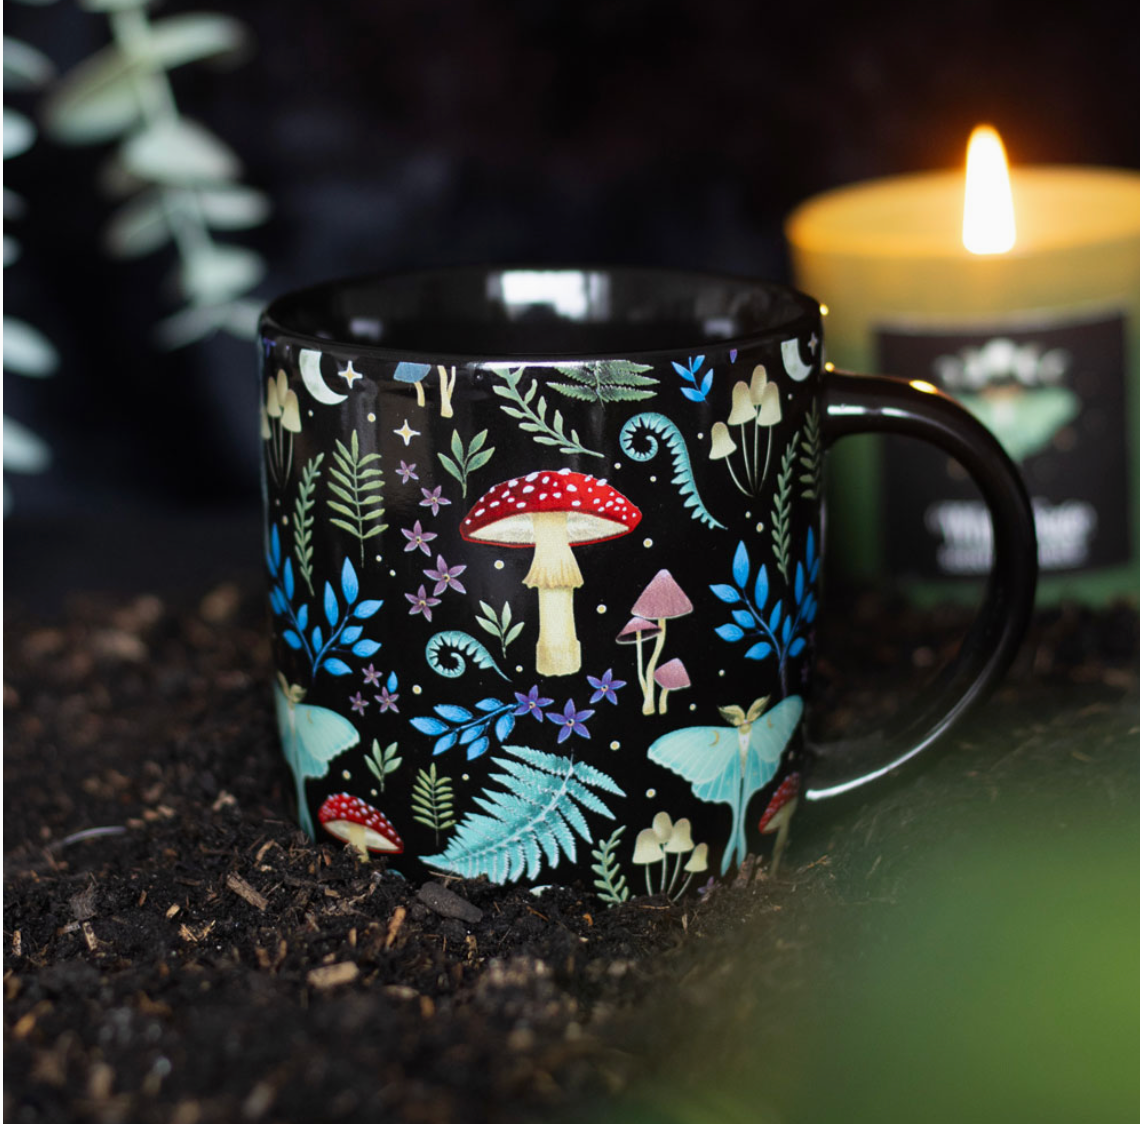 Black mug with a 'mystical forest' print with toadstools, moths, various foliage a star and moon. There is a lit candle in the background